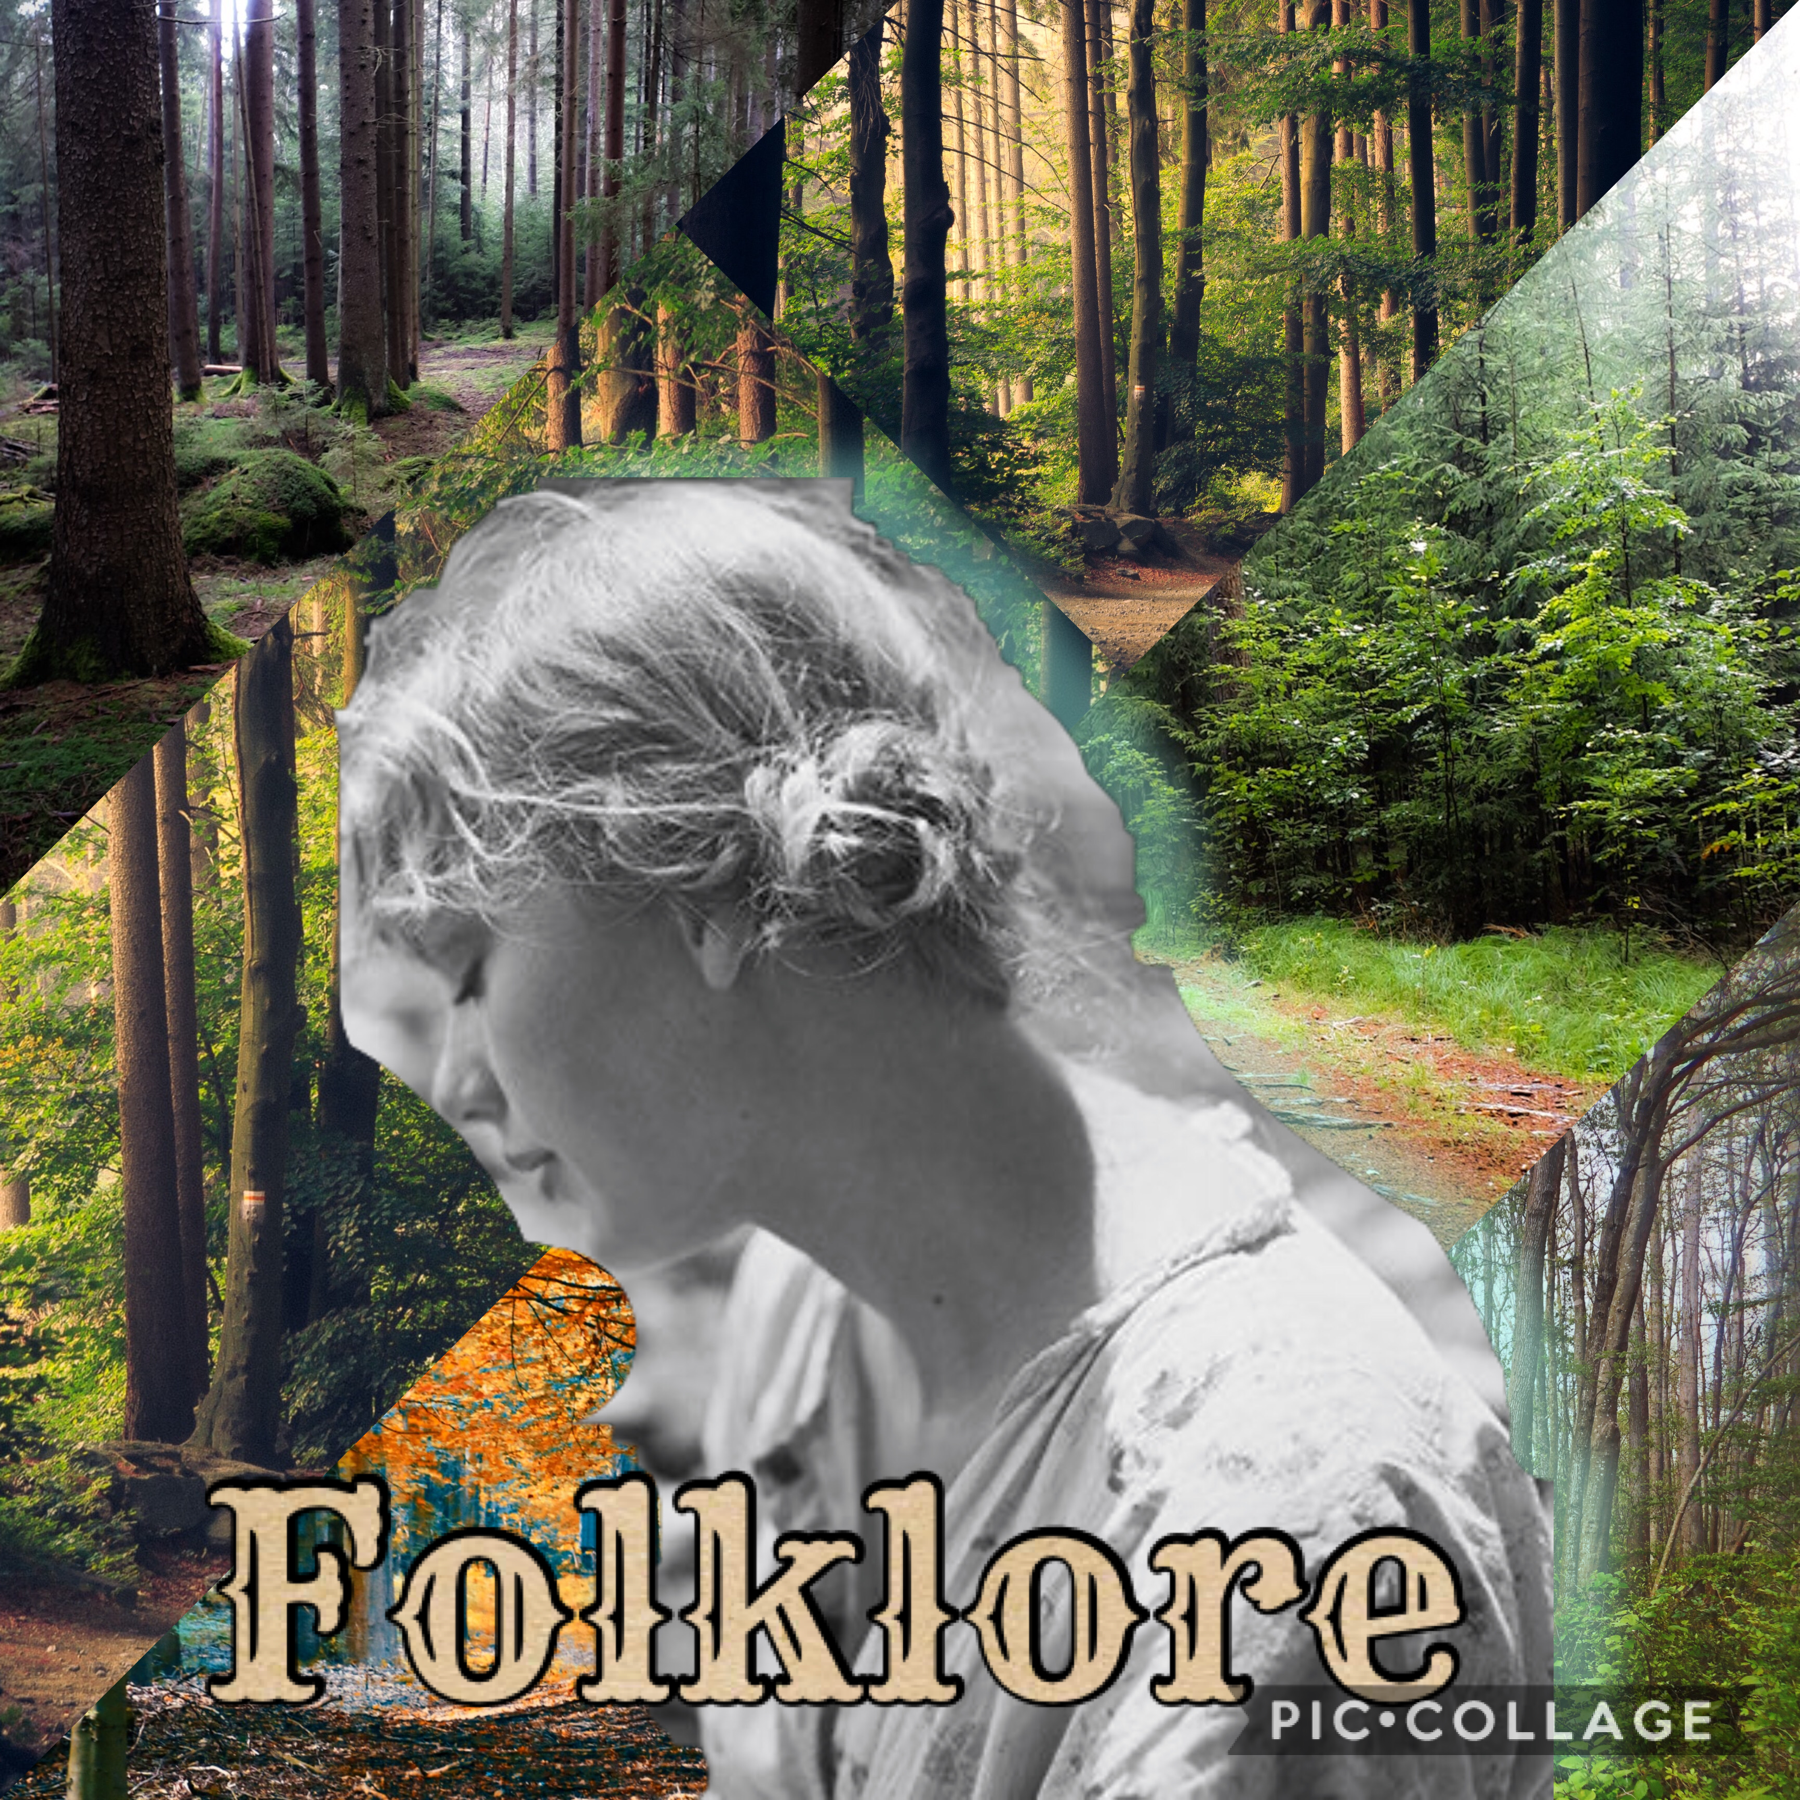 Folklore collage made with PicsArt 